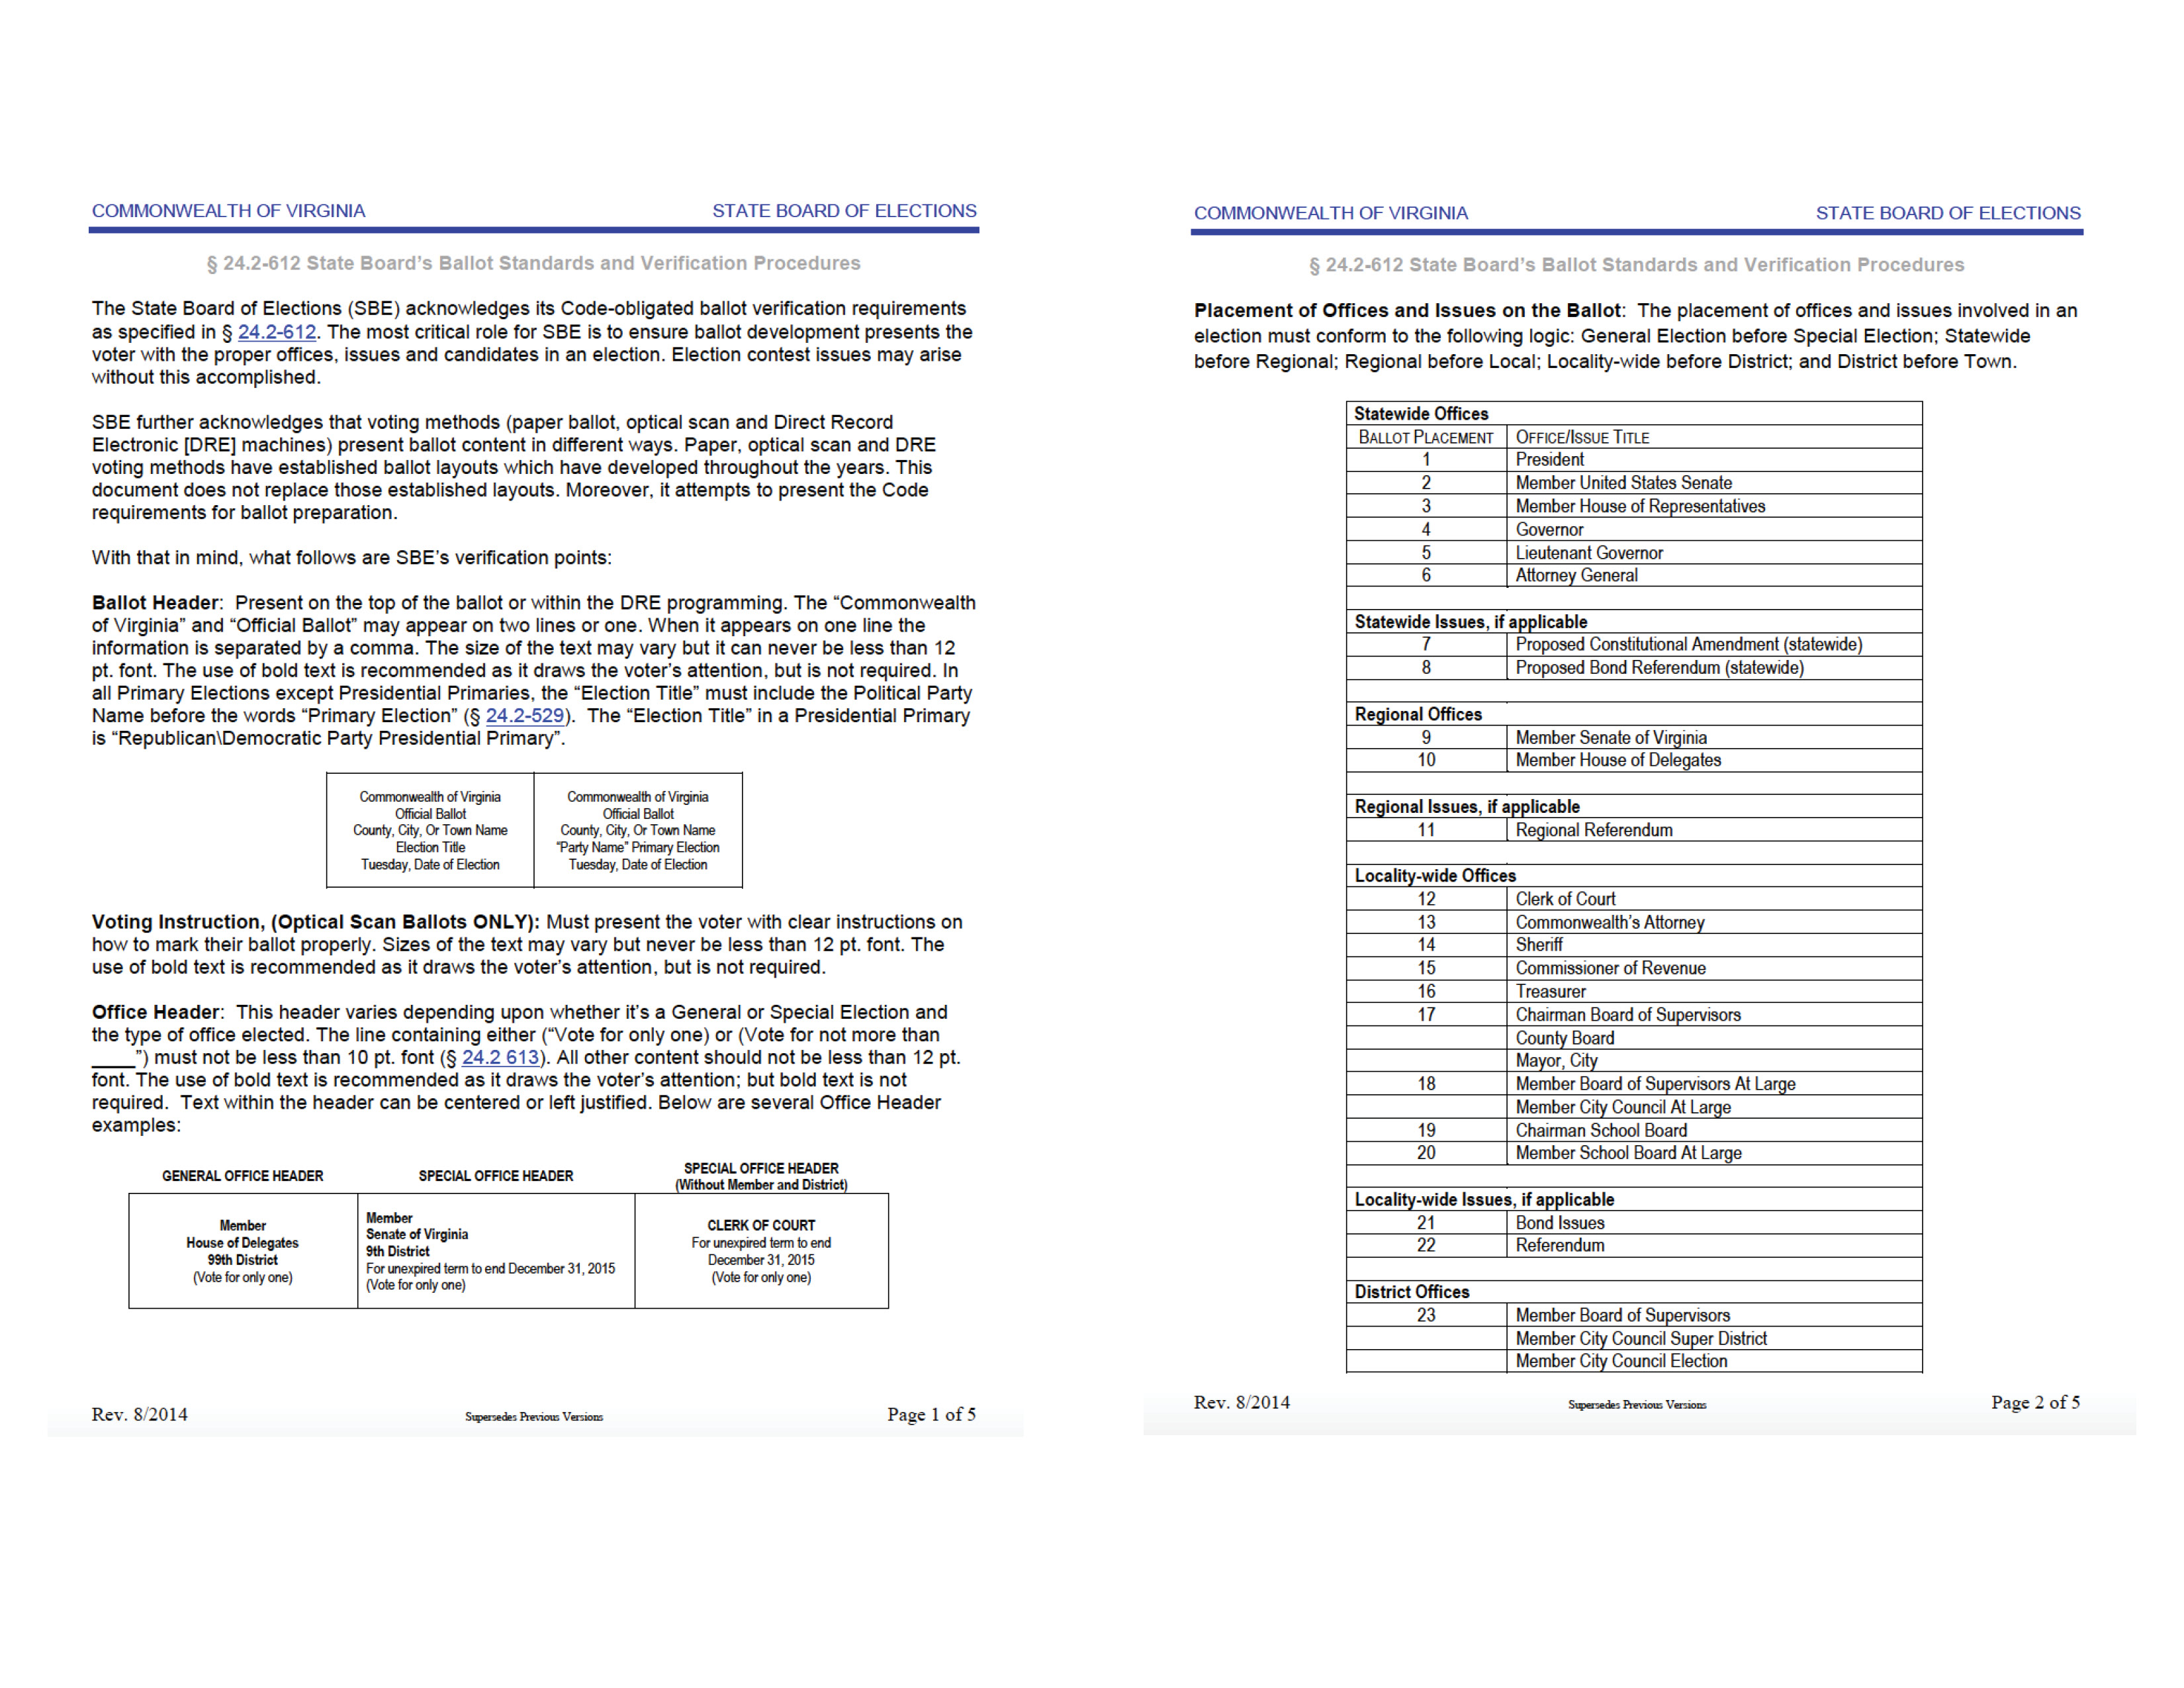 Example pages of previous ballot standard document.